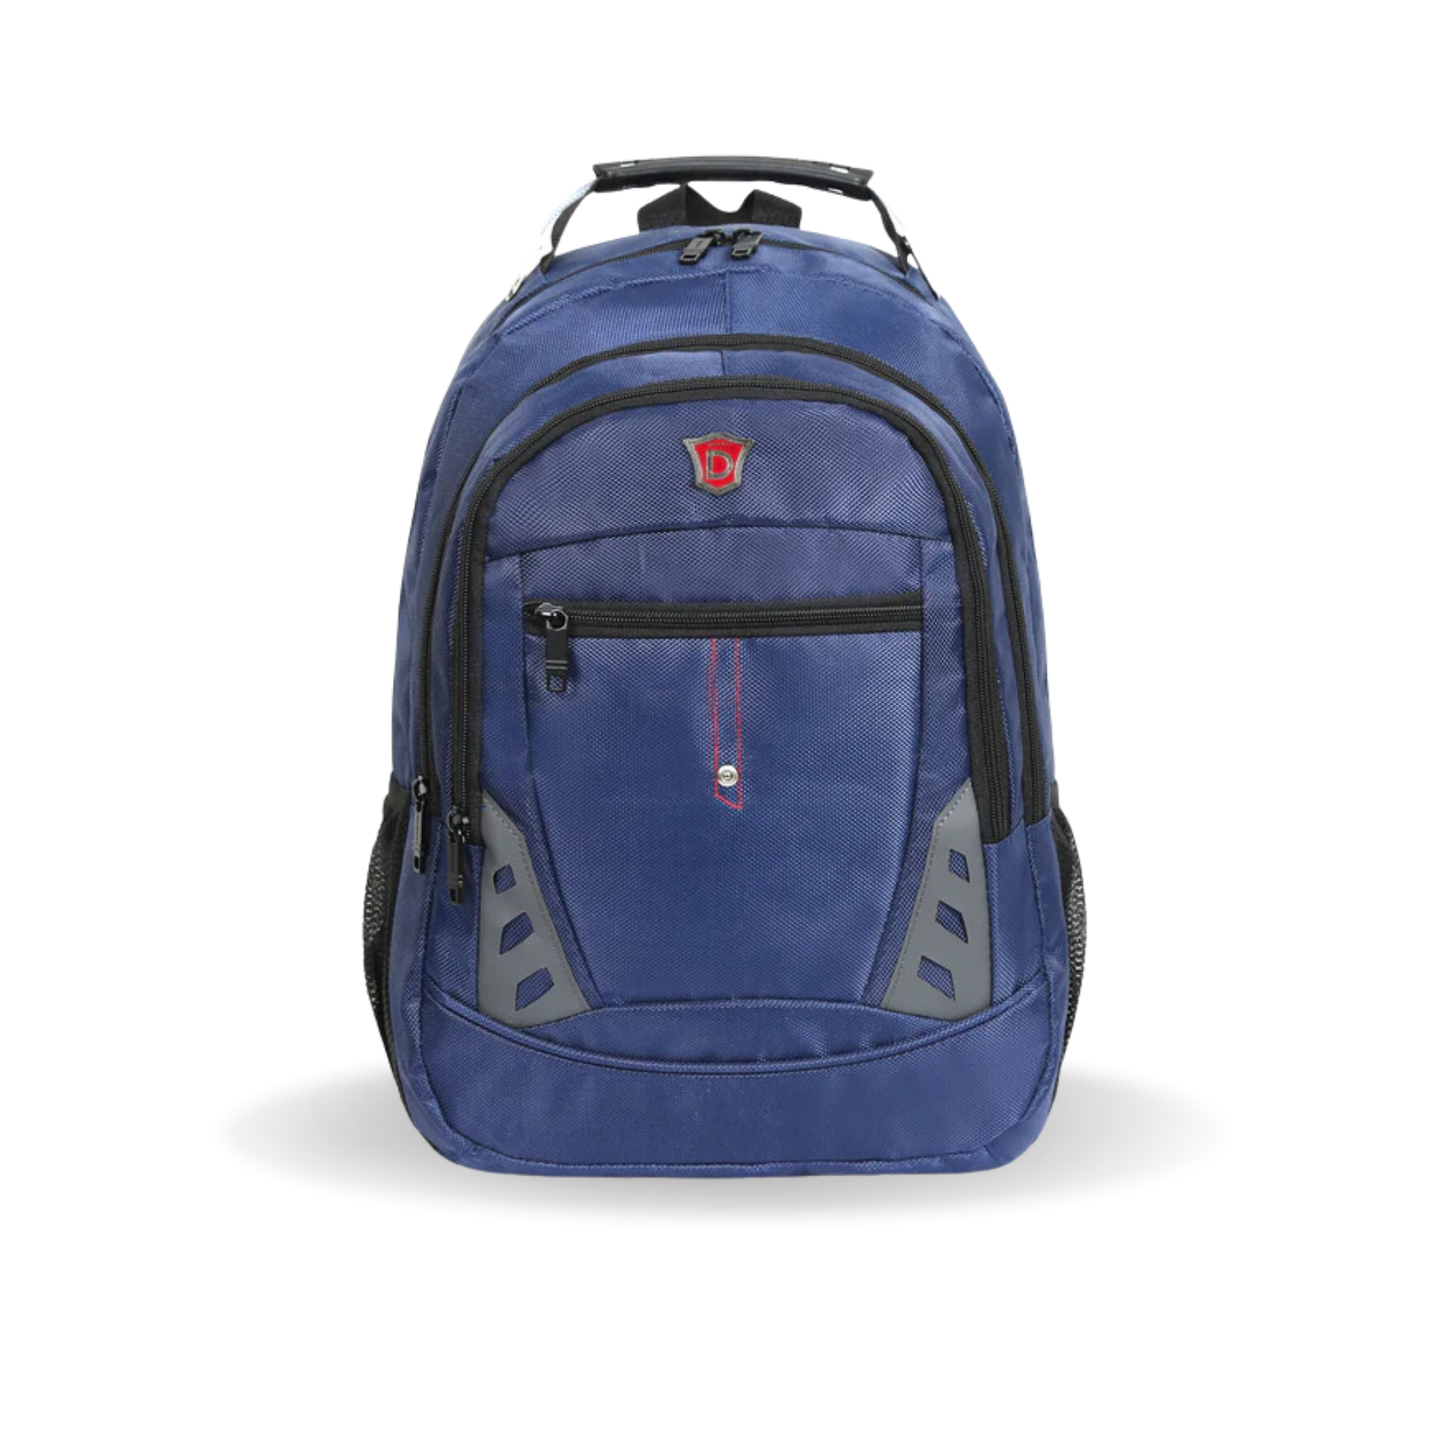 PRECISION Executive 15.6'' Laptop Backpack